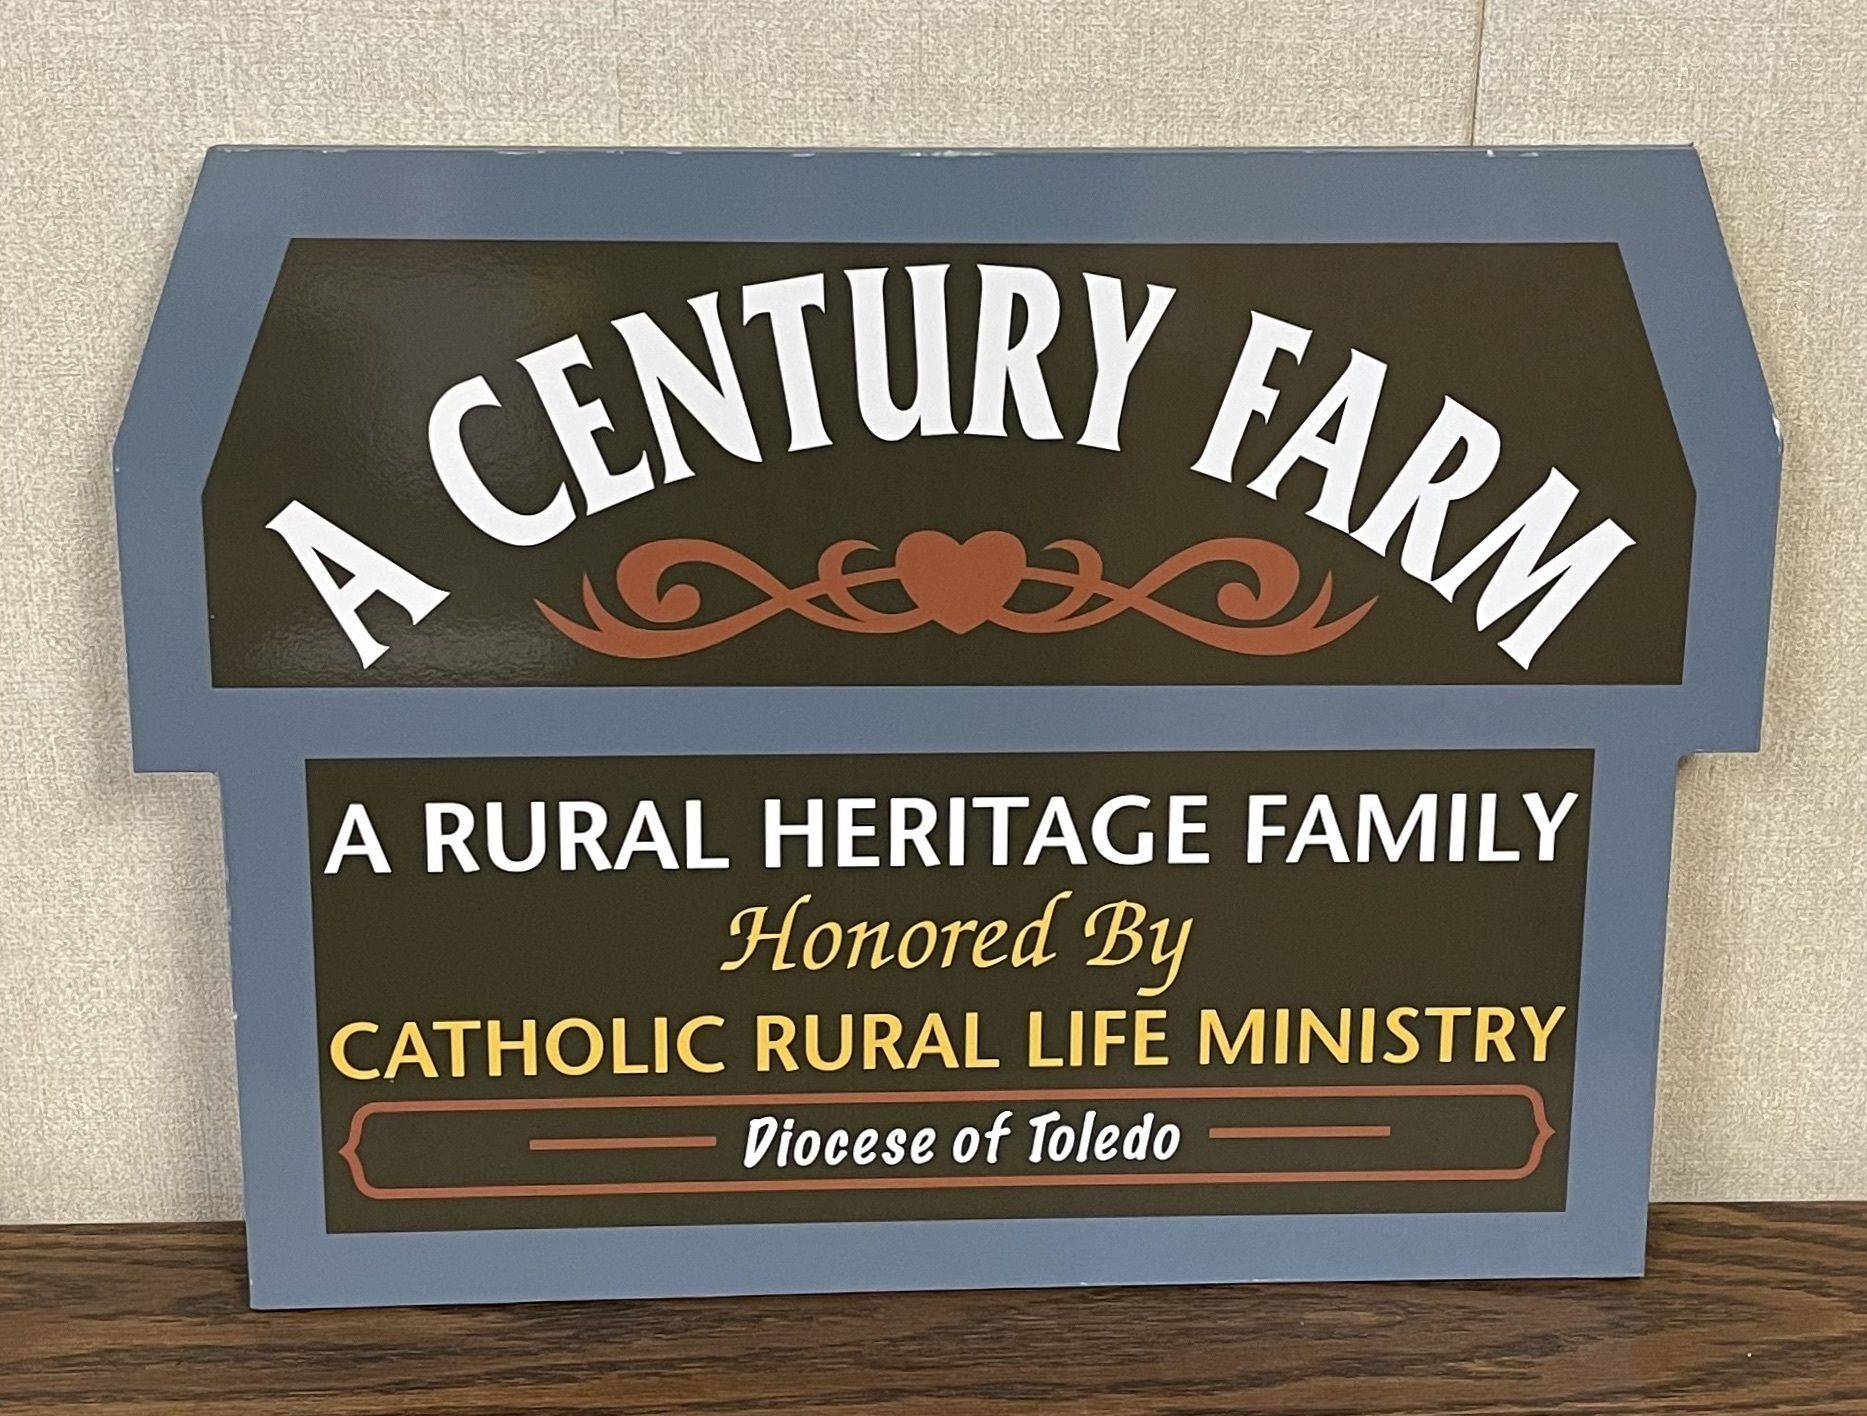 Catholic Charities Now Accepting Century Farm Awards Applications!